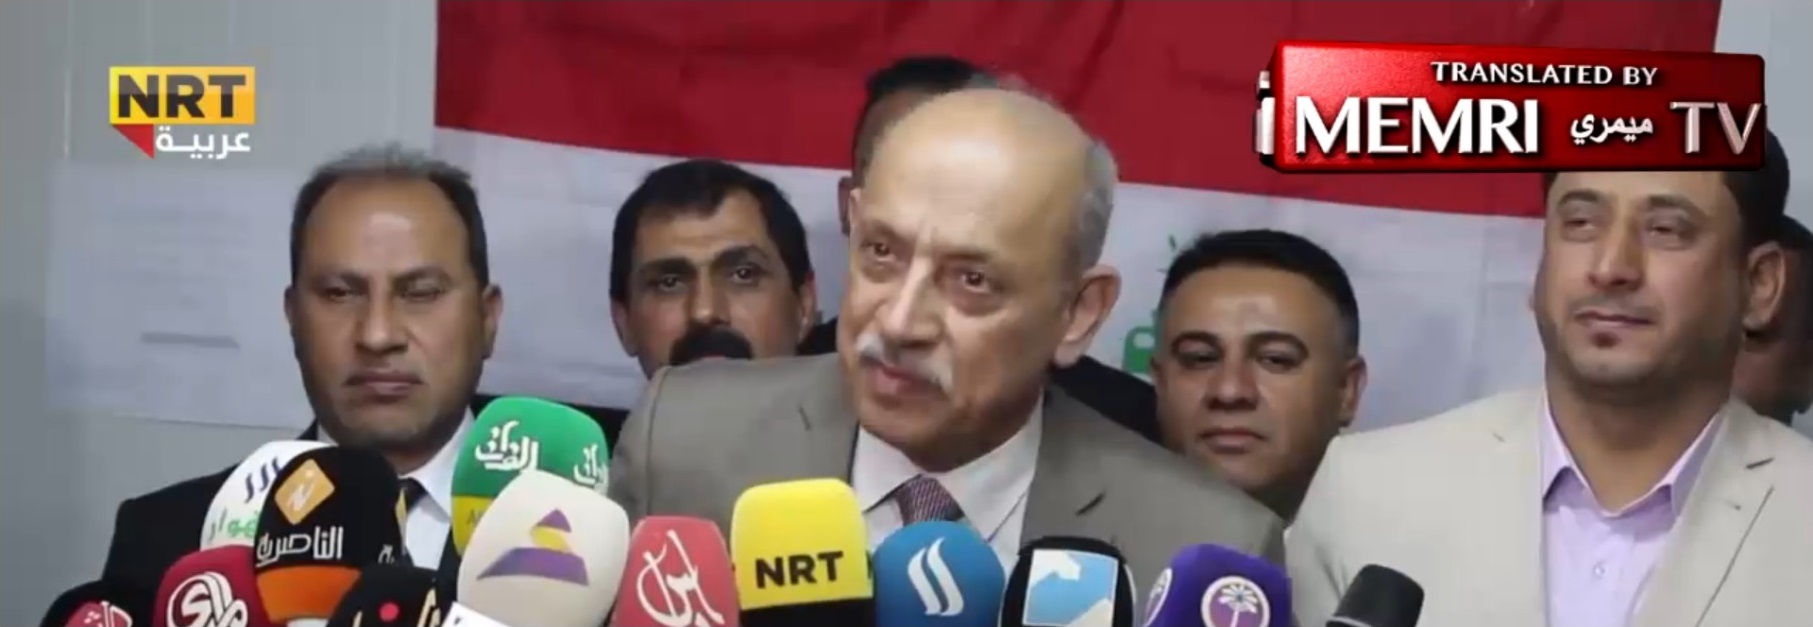 ancient-alien-airport-in-iraq-unexpected-disclosure-from-iraqi-transport-minister